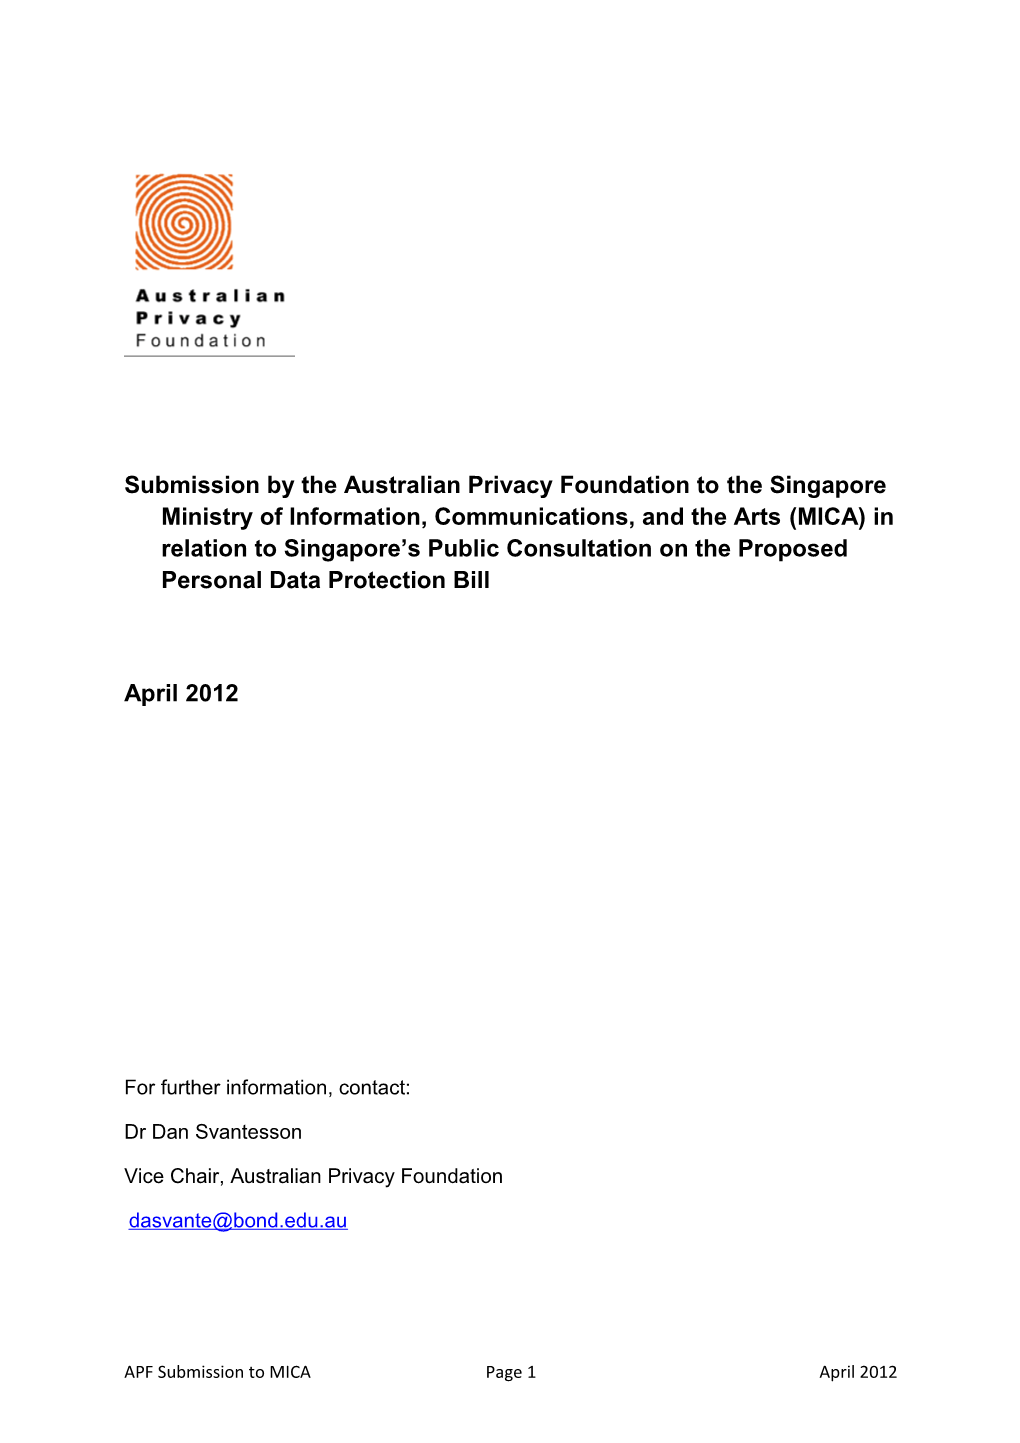 Submission by the Australian Privacy Foundation to the Singapore Ministry of Information